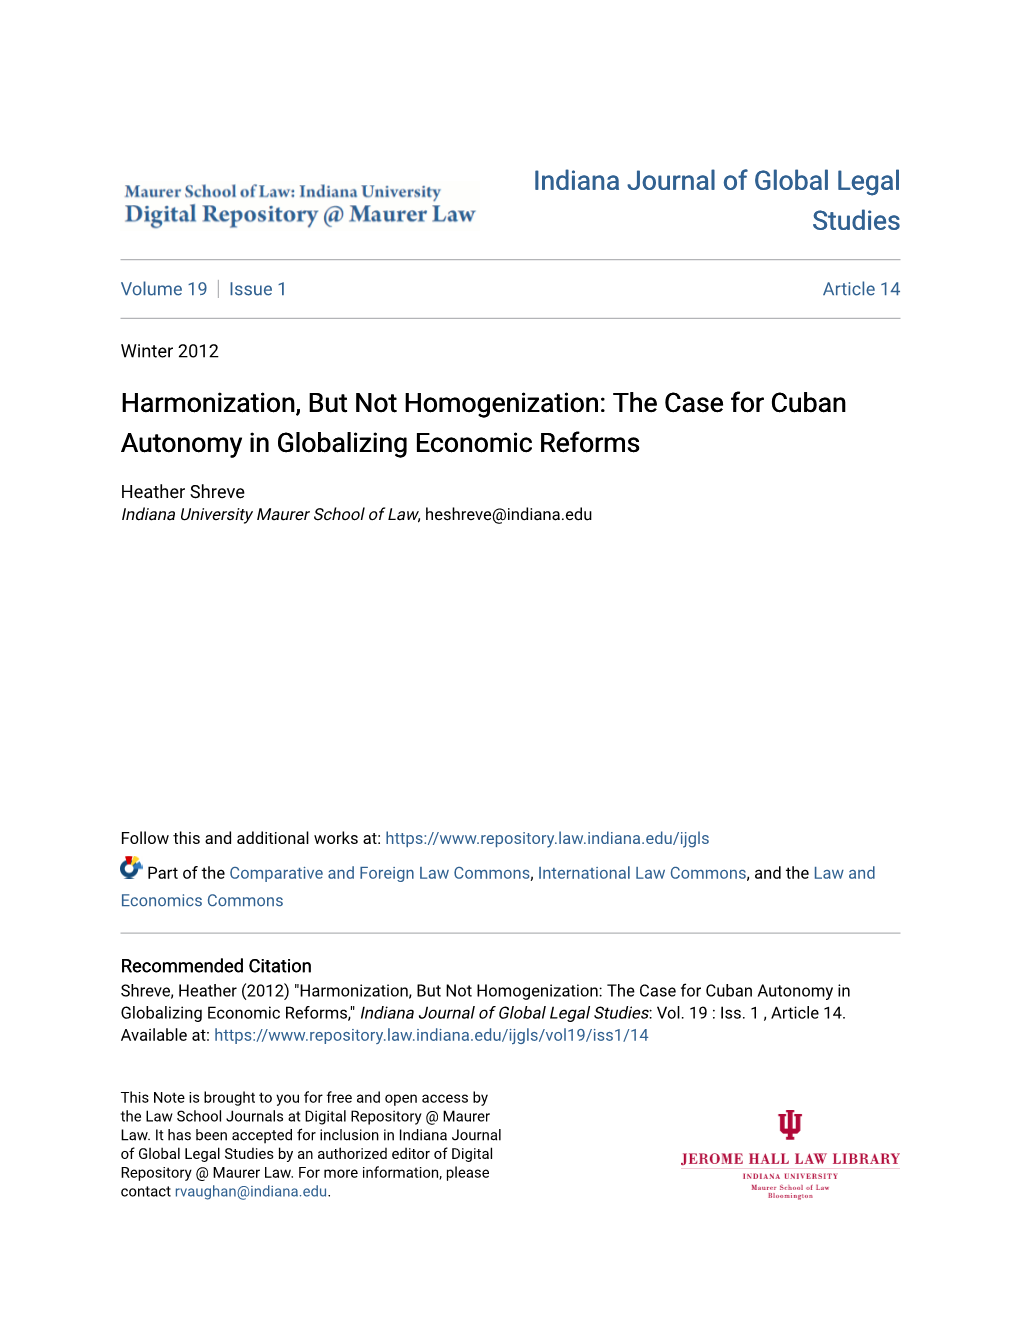 The Case for Cuban Autonomy in Globalizing Economic Reforms